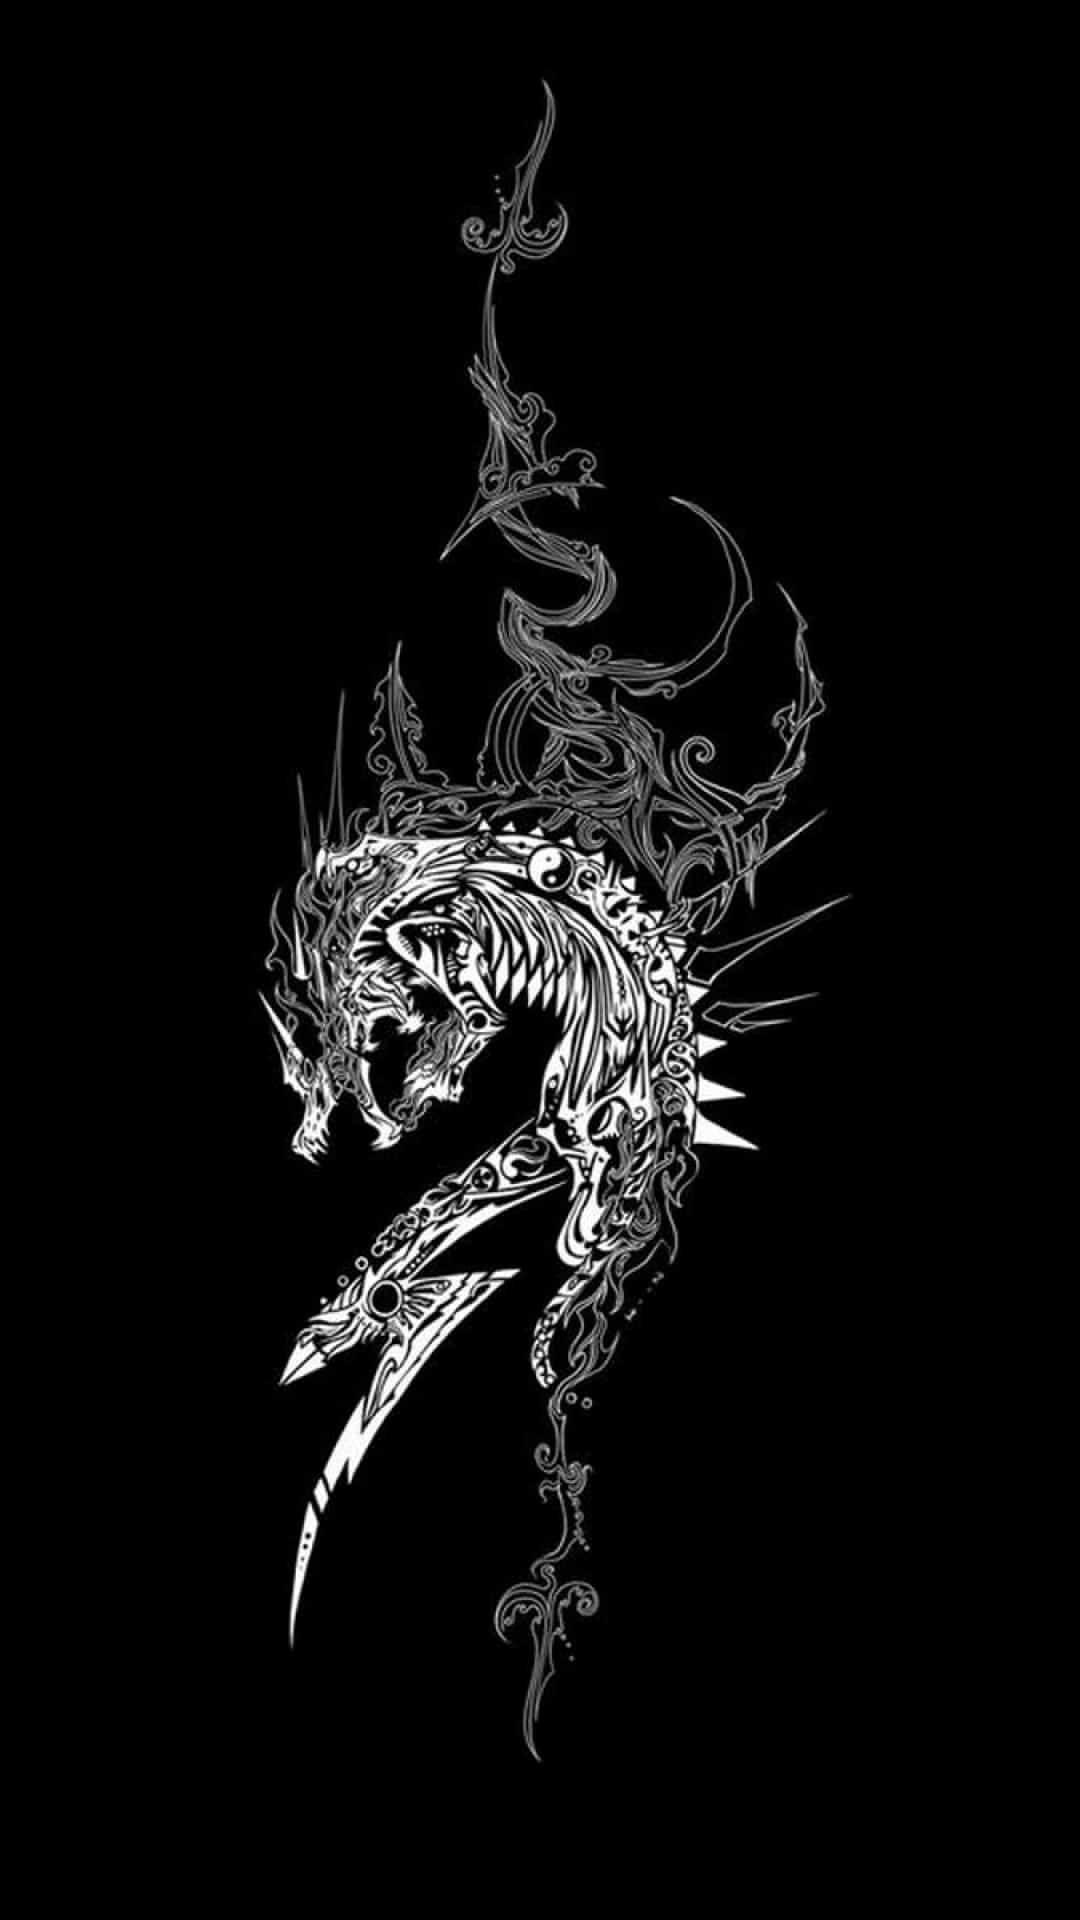 A black and white tattoo of an animal - Dragon